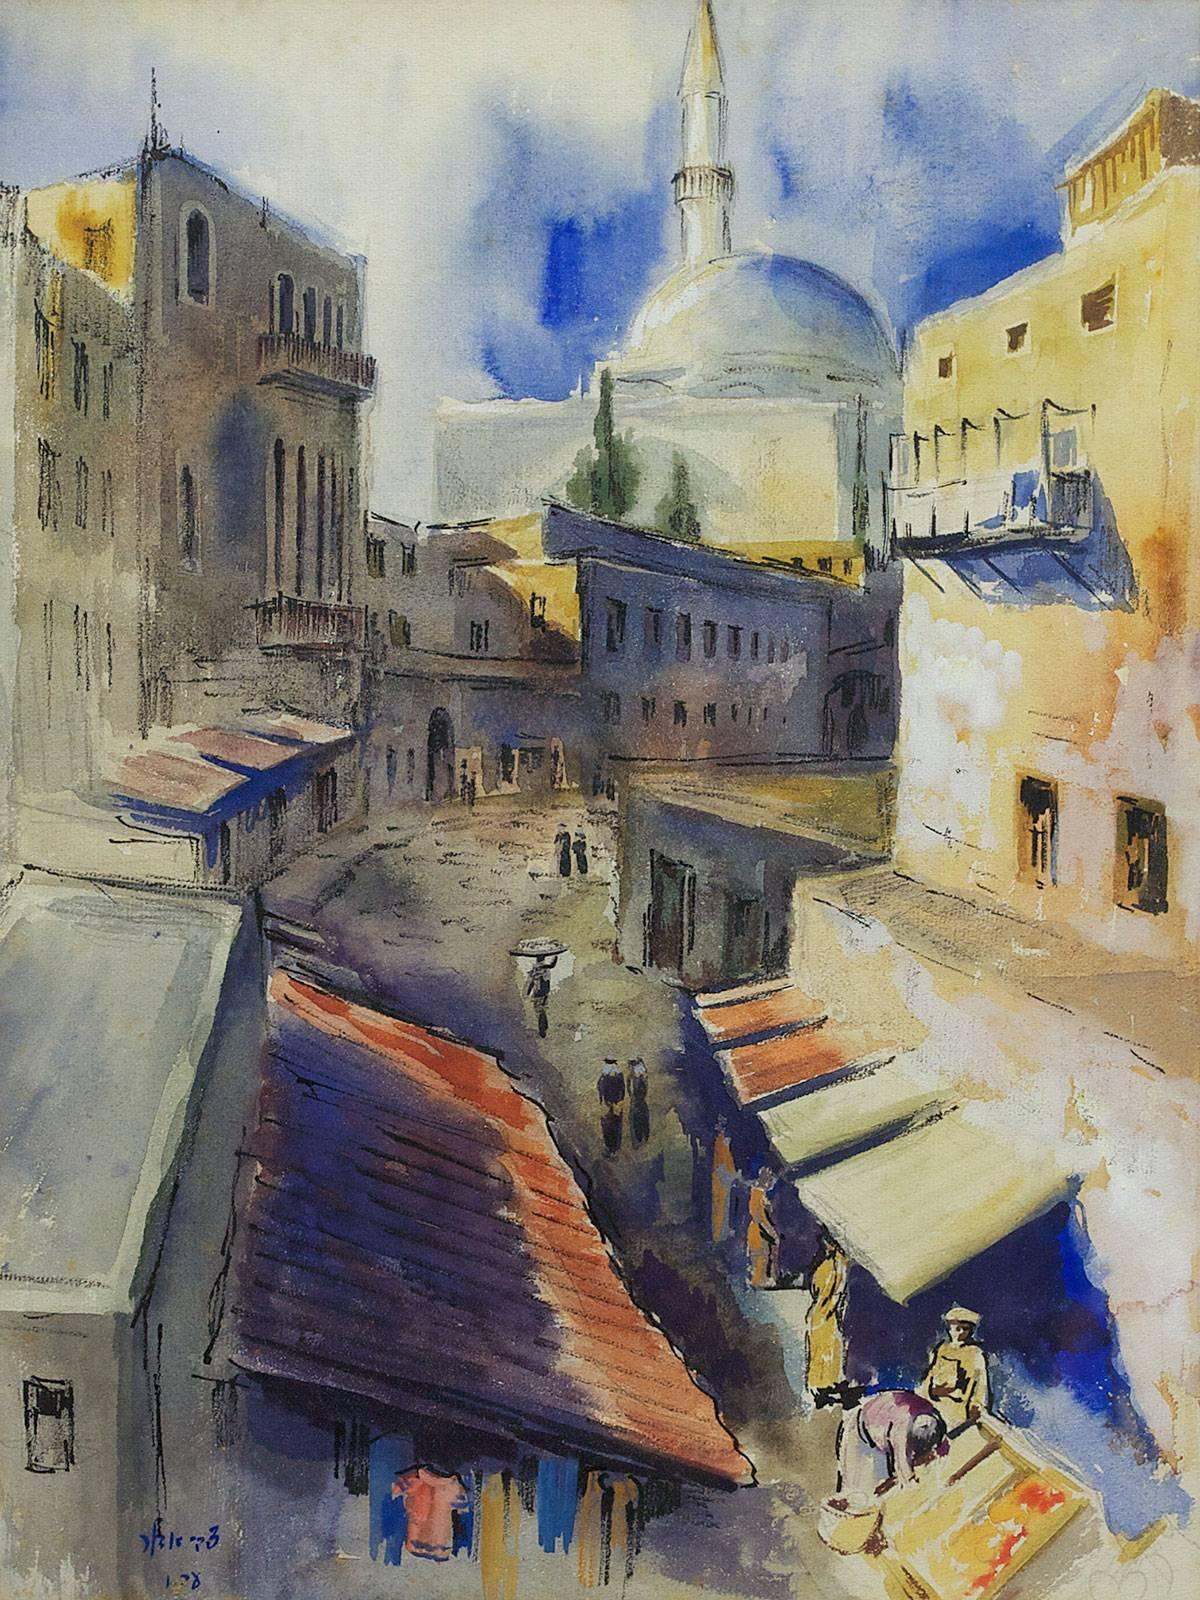 Zvi Adler Landscape Painting - Painting of Old Town Of Akko, Acre, Israel 